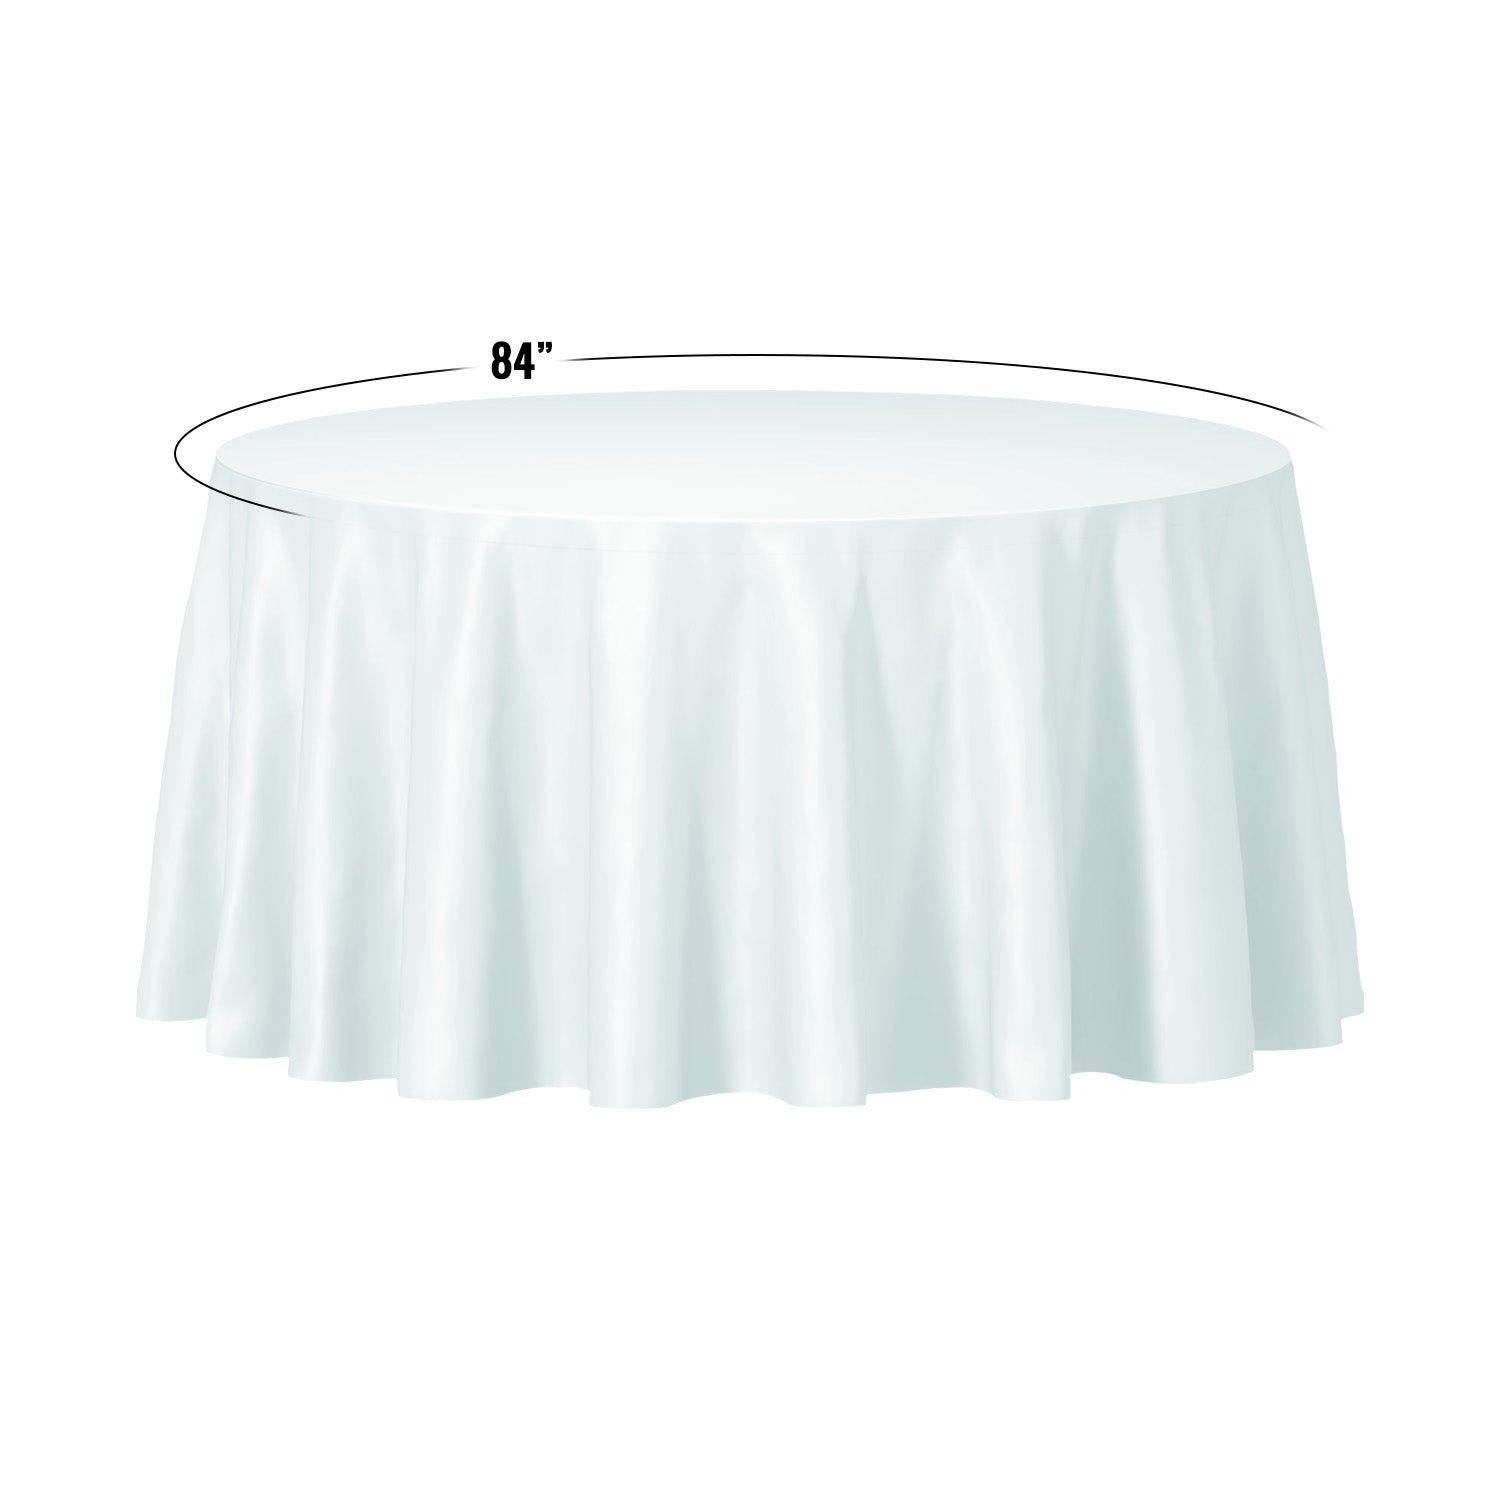 84" Clear Round Plastic Tablecloths Dimensions | Kaya Collection